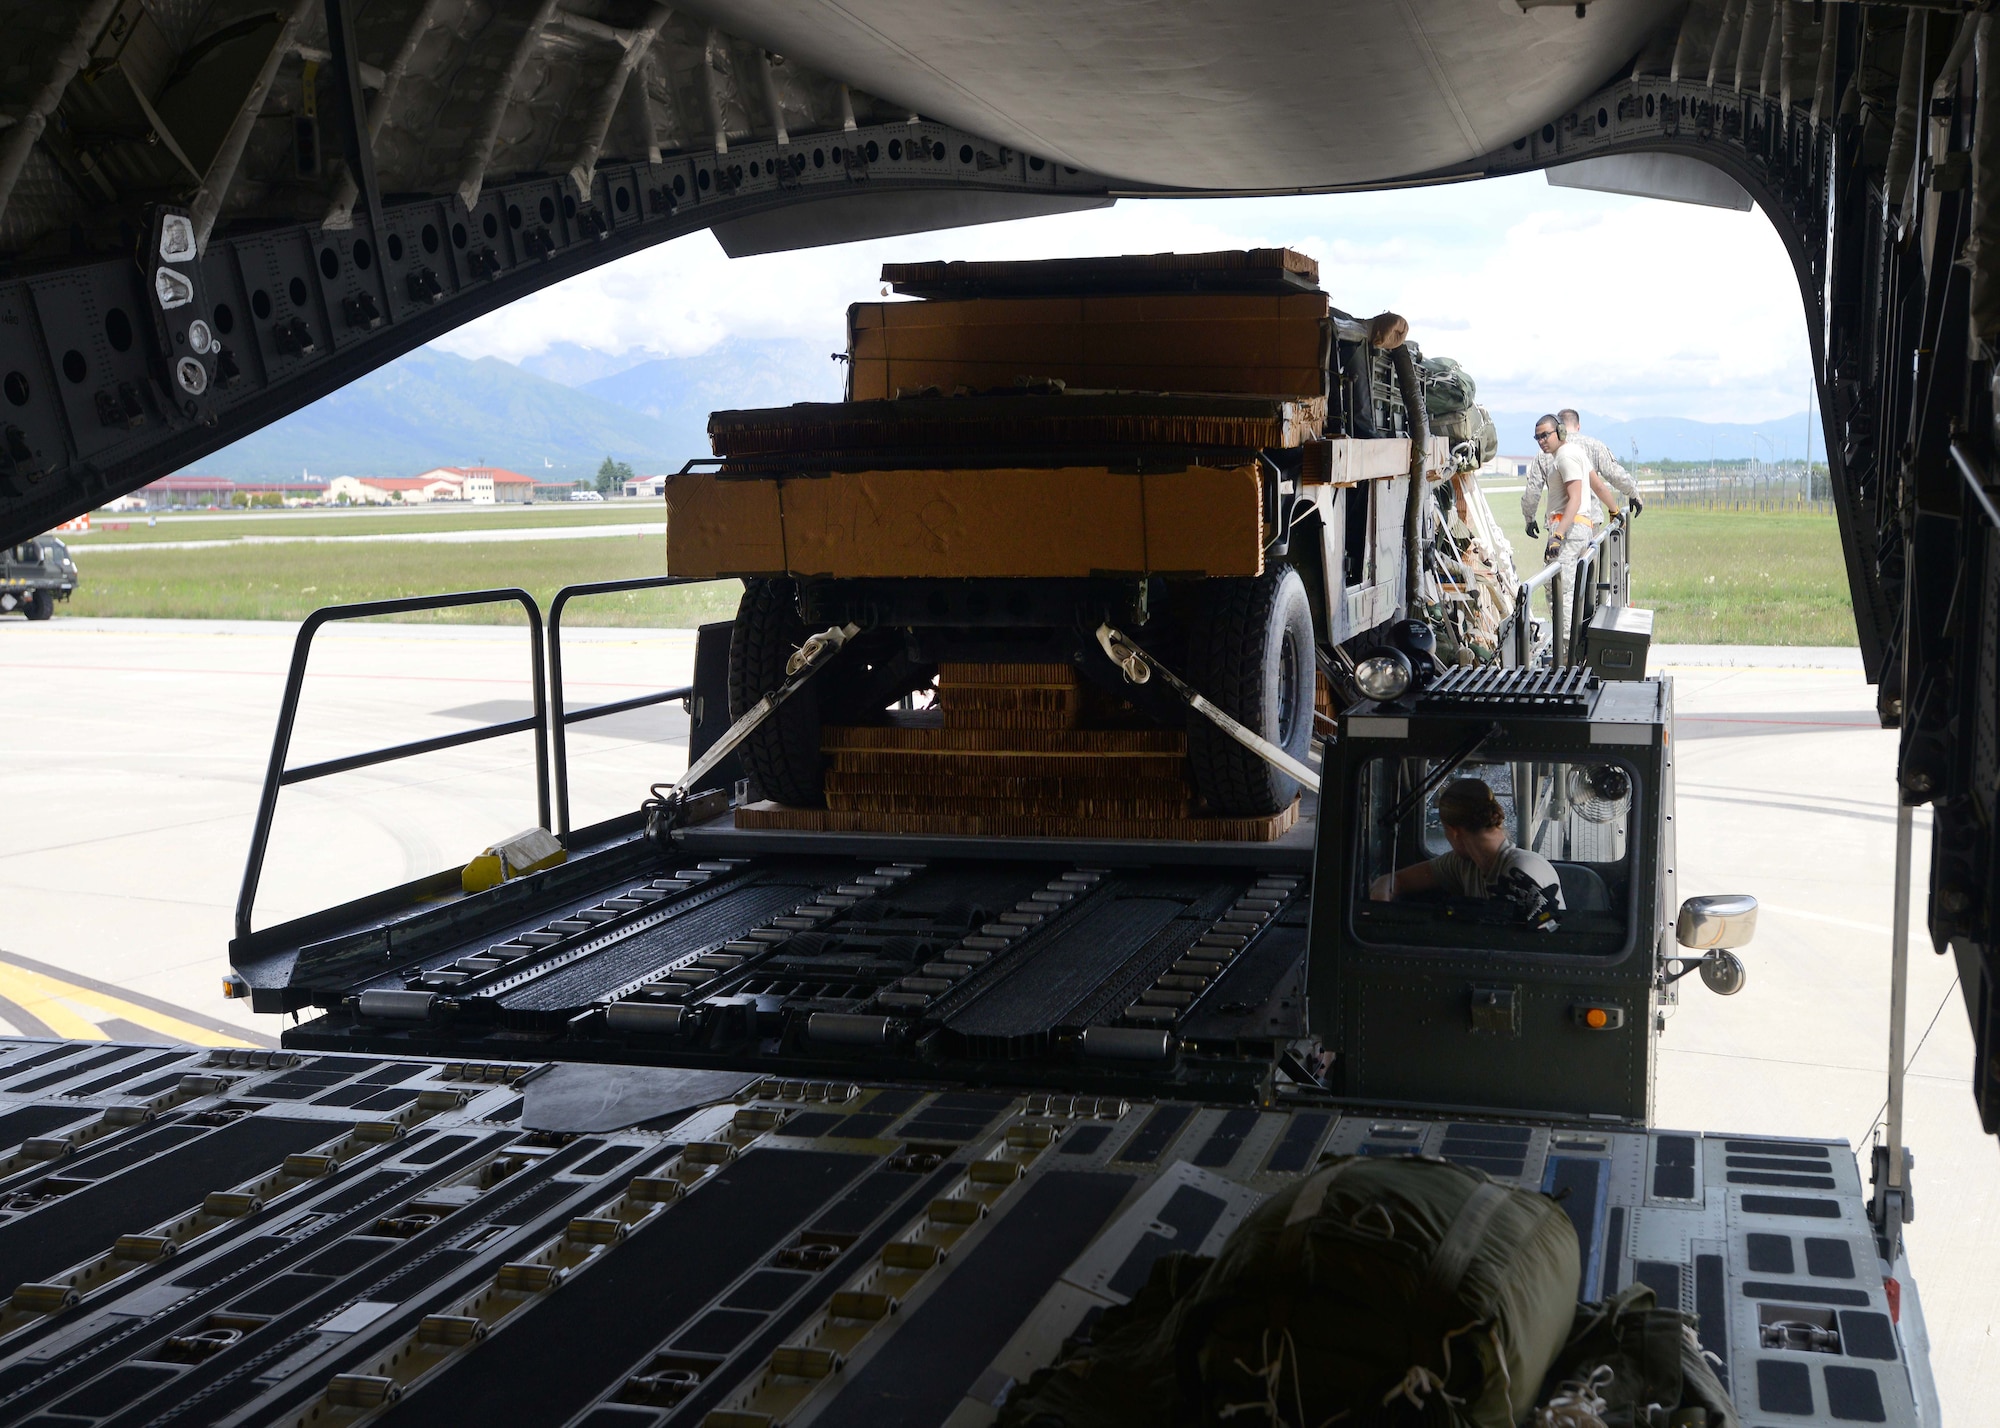 Aircraft services technicians from the 724th Air Mobility Squadron load a Humvee onto a C-17 Globemaster III, May 12, 2014, at Aviano Air Base, Italy. The Aviano Airmen assisted in loading cargo and U.S. Army paratroopers onto the aircraft in support of U.S. Army Europe’s Land Forces Assurance Exercises.  (U.S. Air Force photo/Airman 1st Class Deana Heitzman)